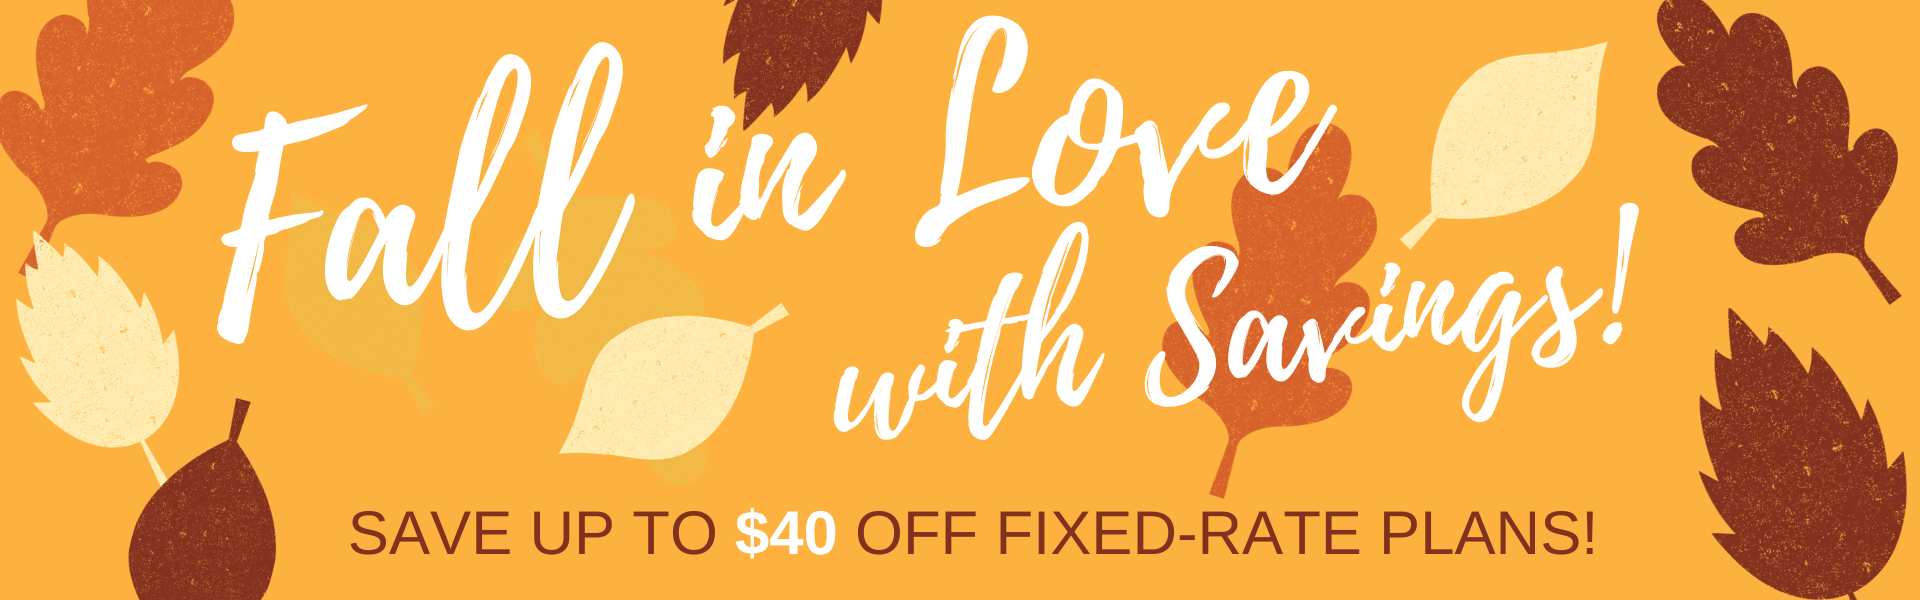 Fall In Love with Savings